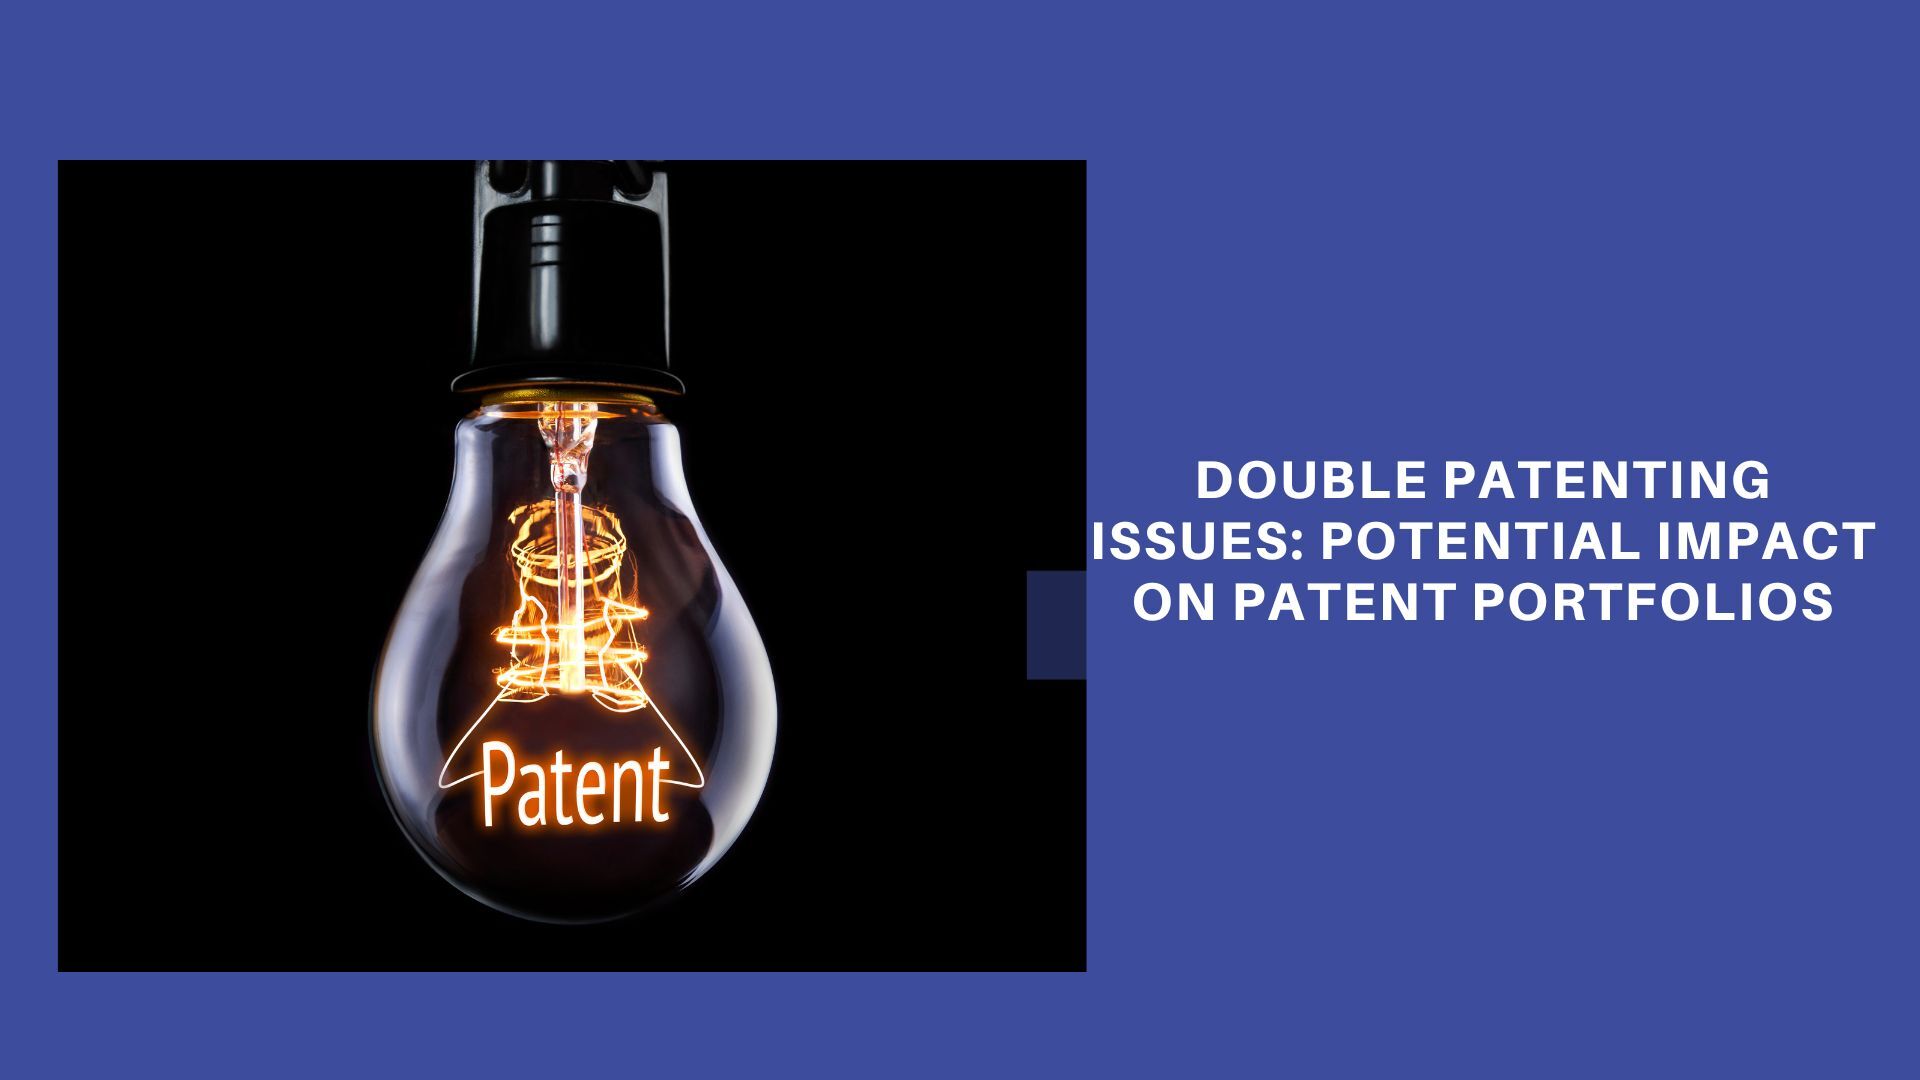 Double patenting